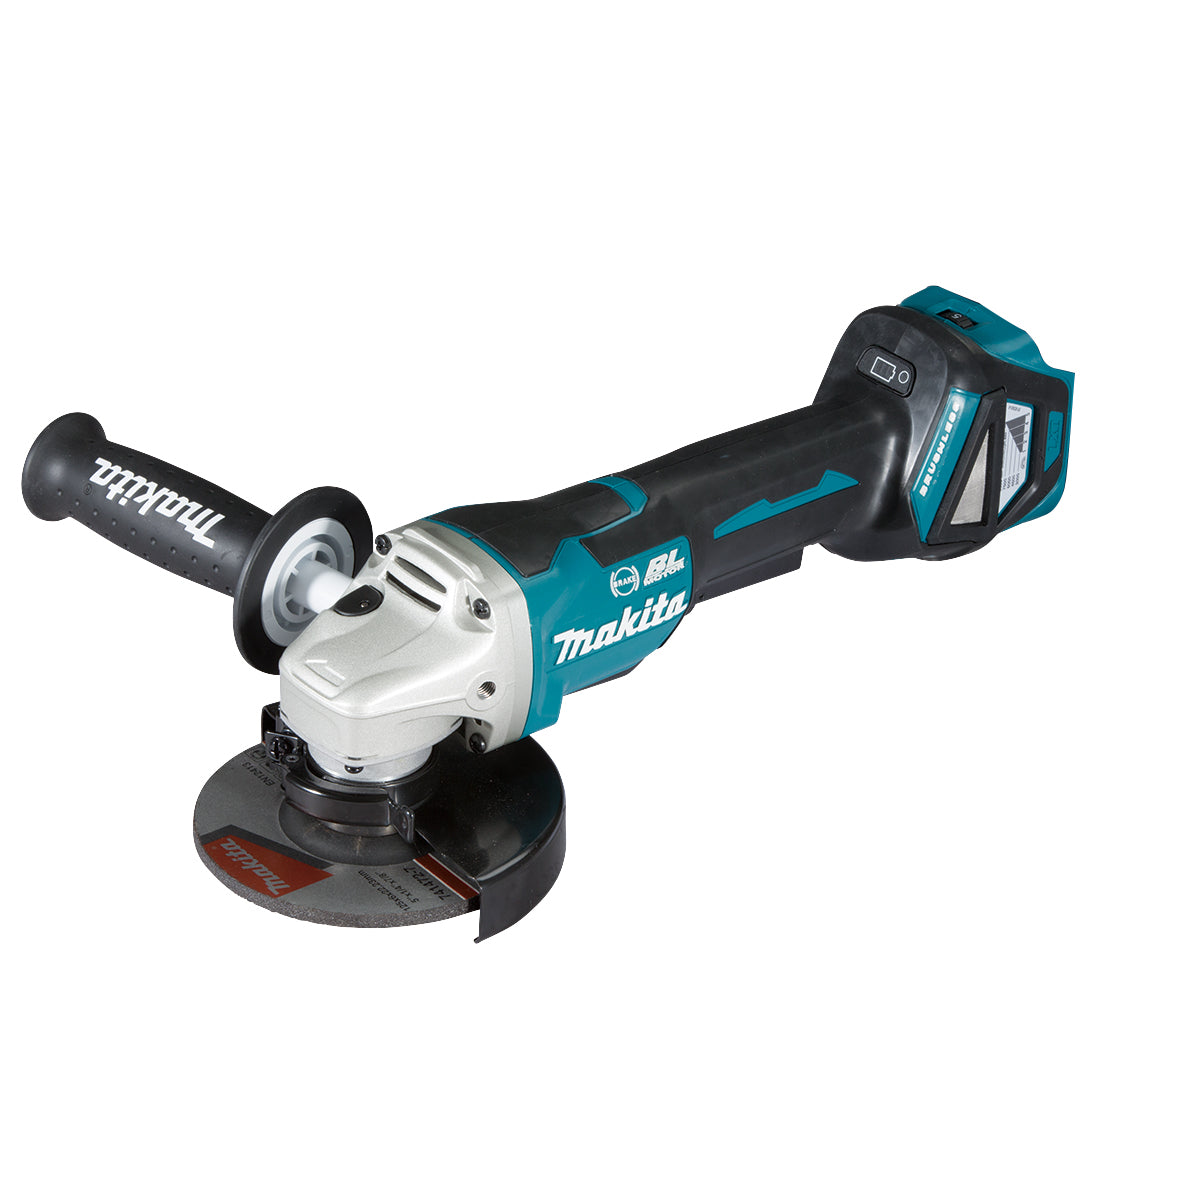 18V 125mm Brushless Paddle Switch Angle Grinder Bare (Tool Only) DGA517Z by Makita